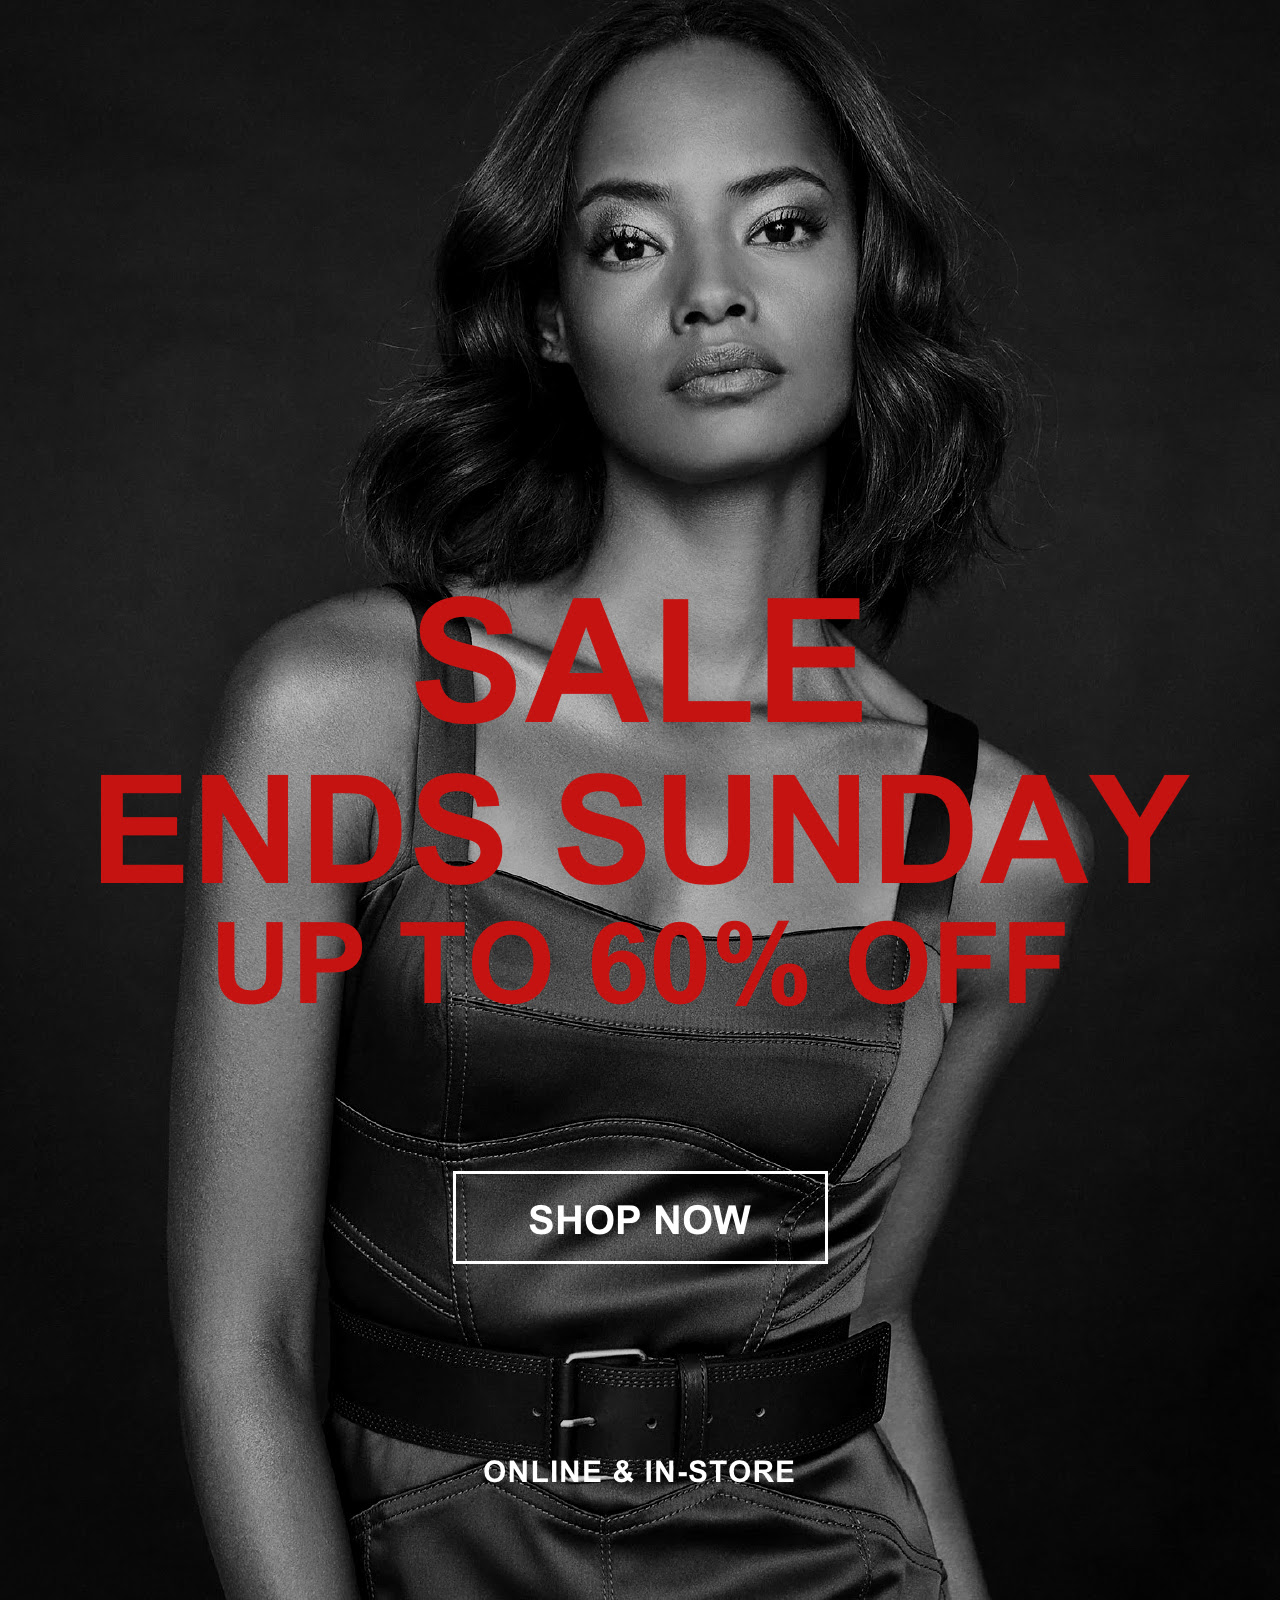 REISS - Hurry Sale Ends Sunday